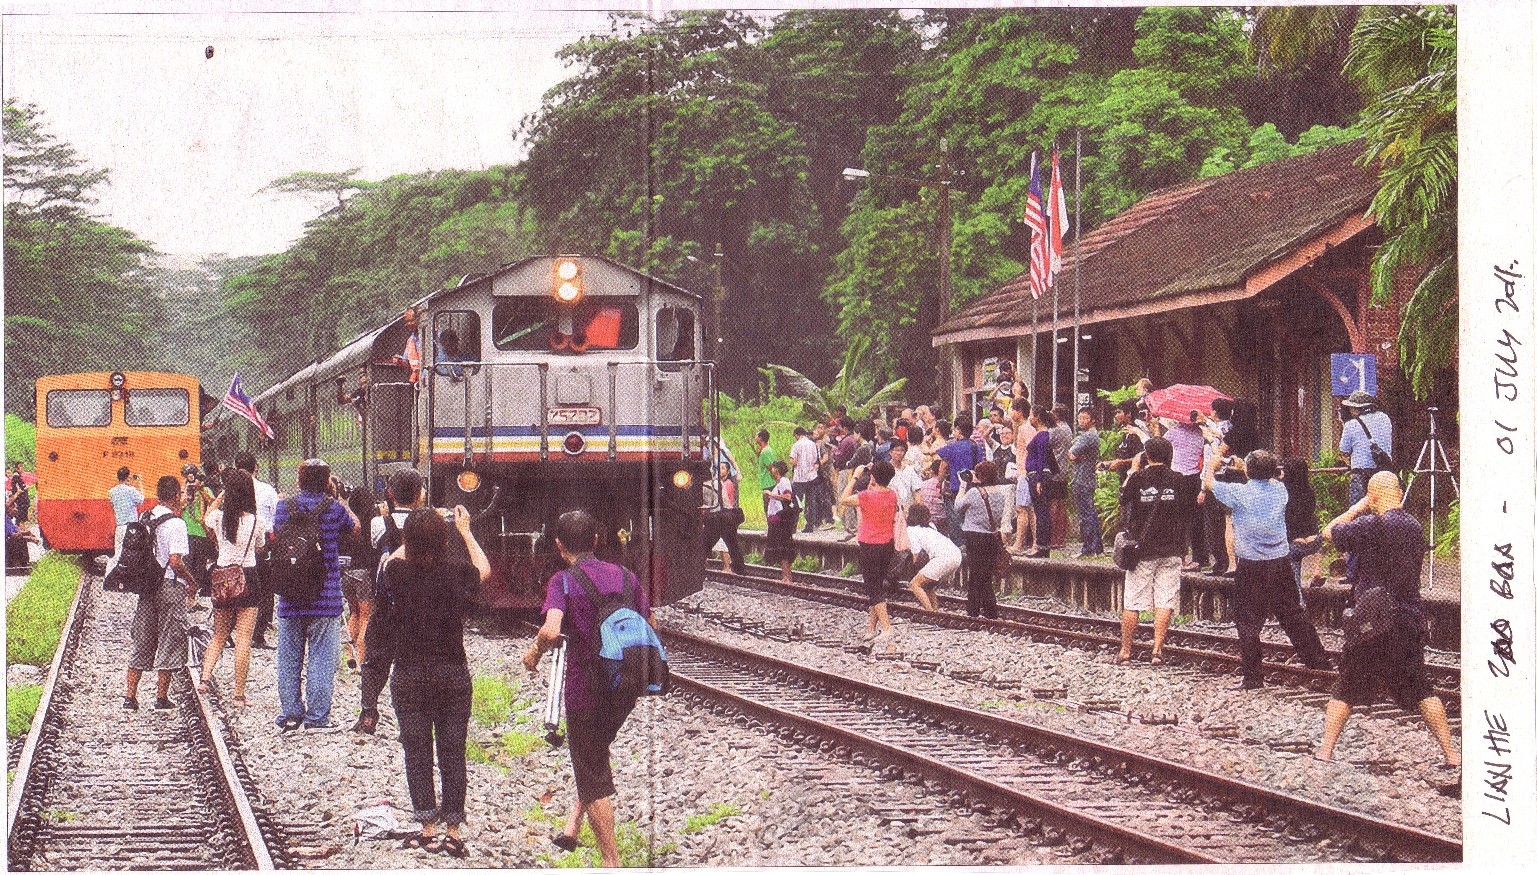 The crowds were at Bukit Timah too!